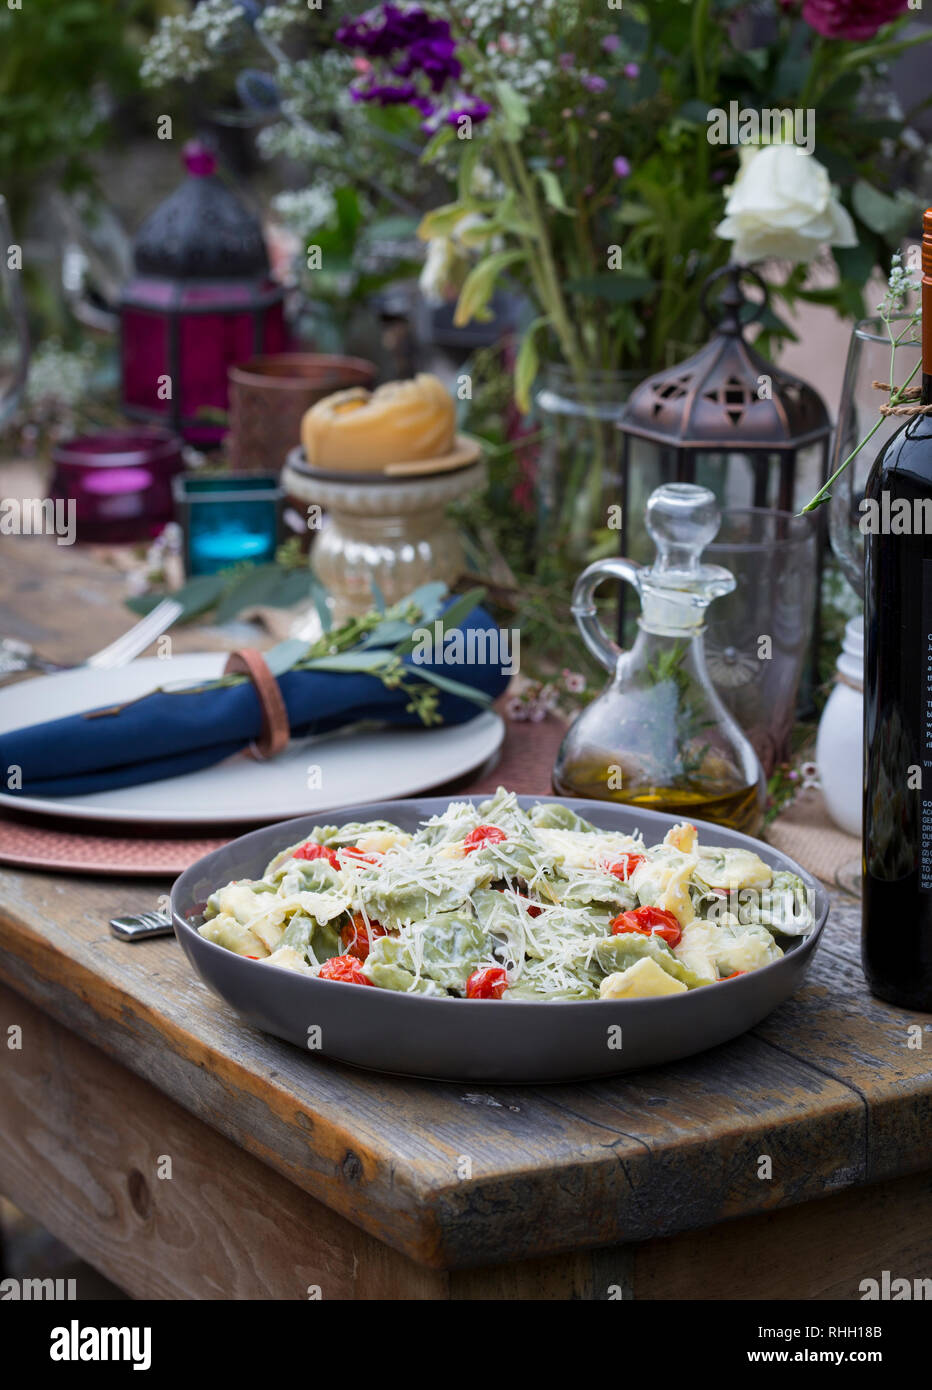 Serving bowl of green and yellow ravioli with tomatoes and shredded parmesan cheese on wooden table for backyard outdoor dinner party, with olive oil. Stock Photo